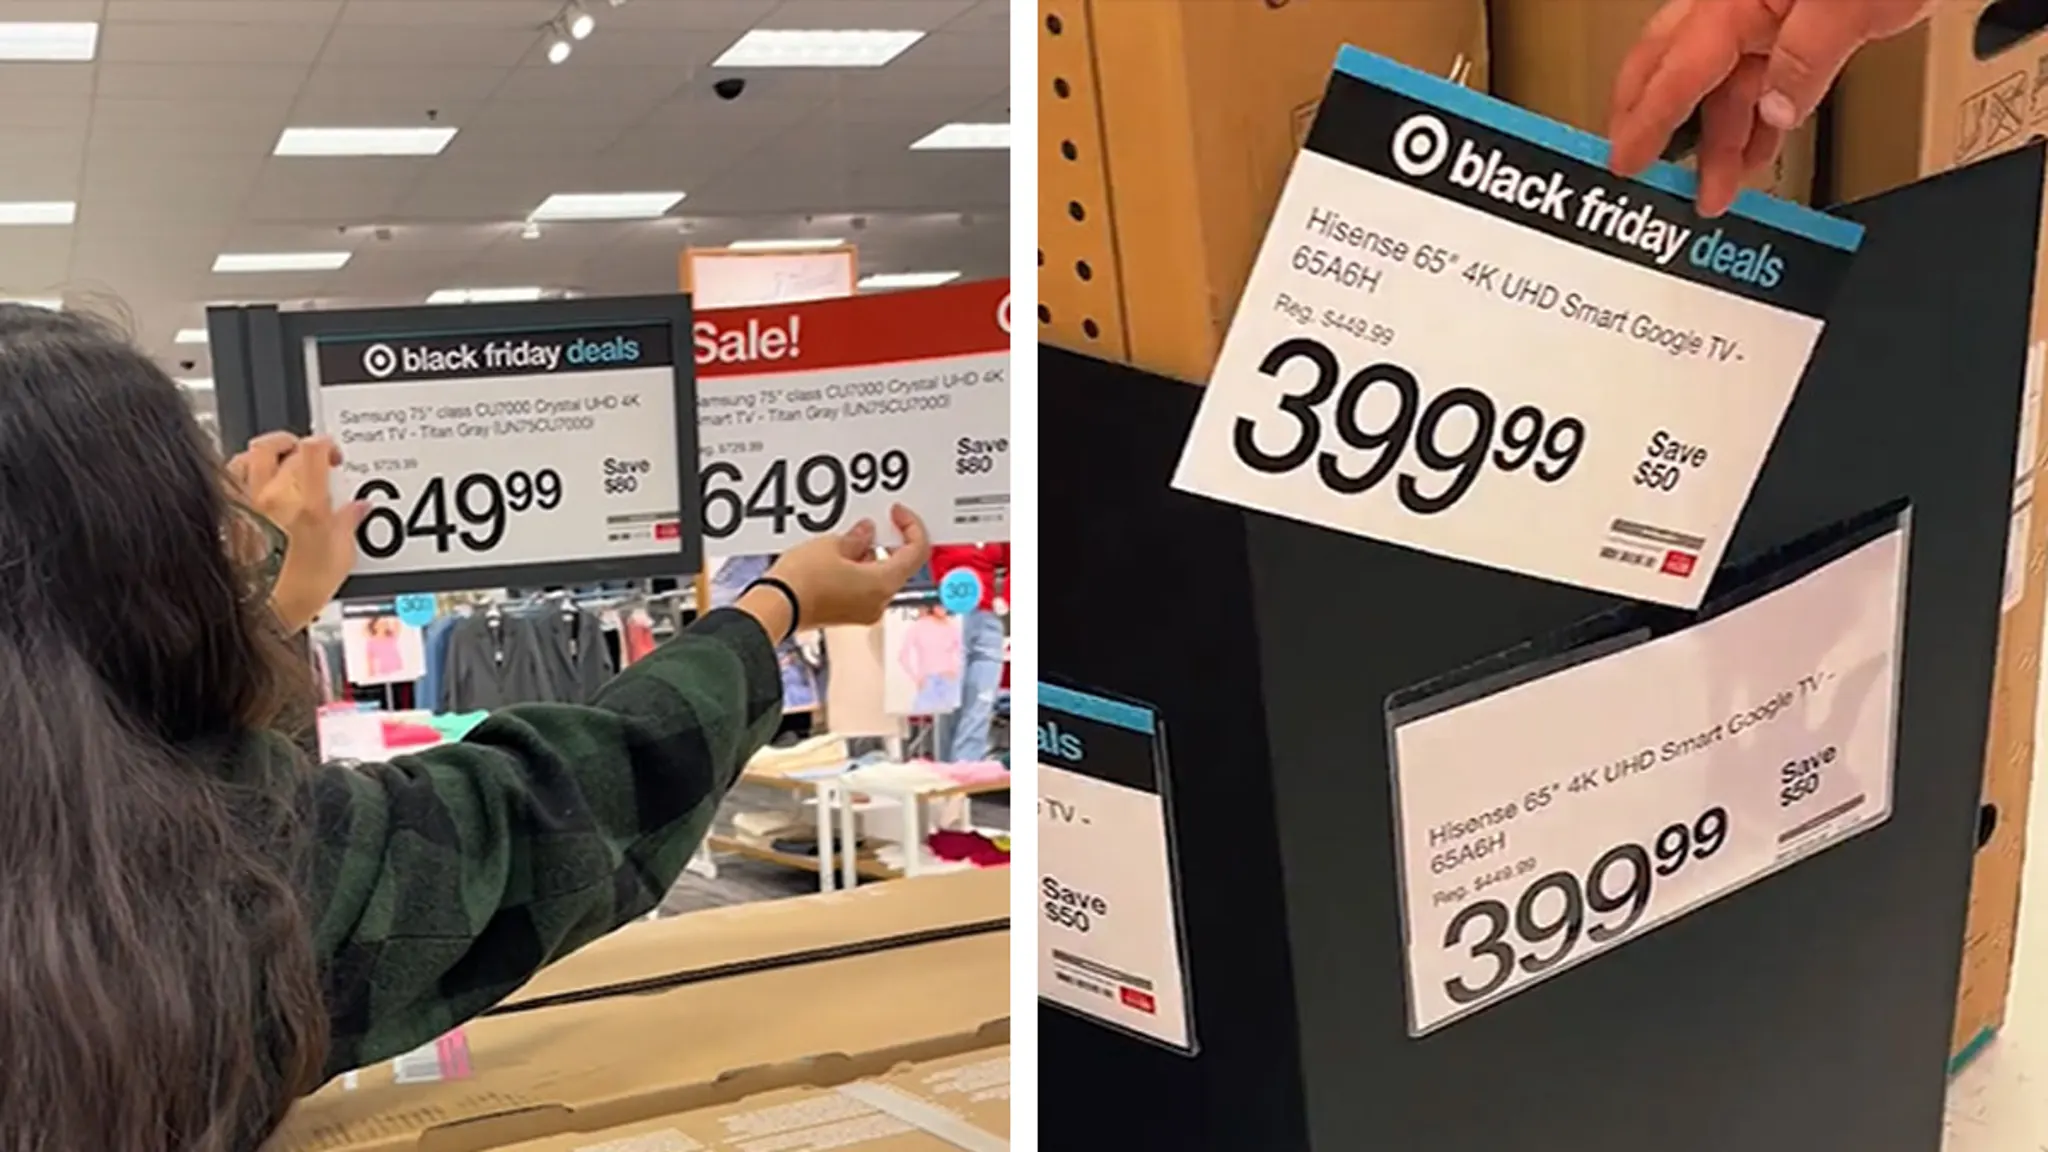 Target Exposed: Black Friday Signage Concealing Same Prices